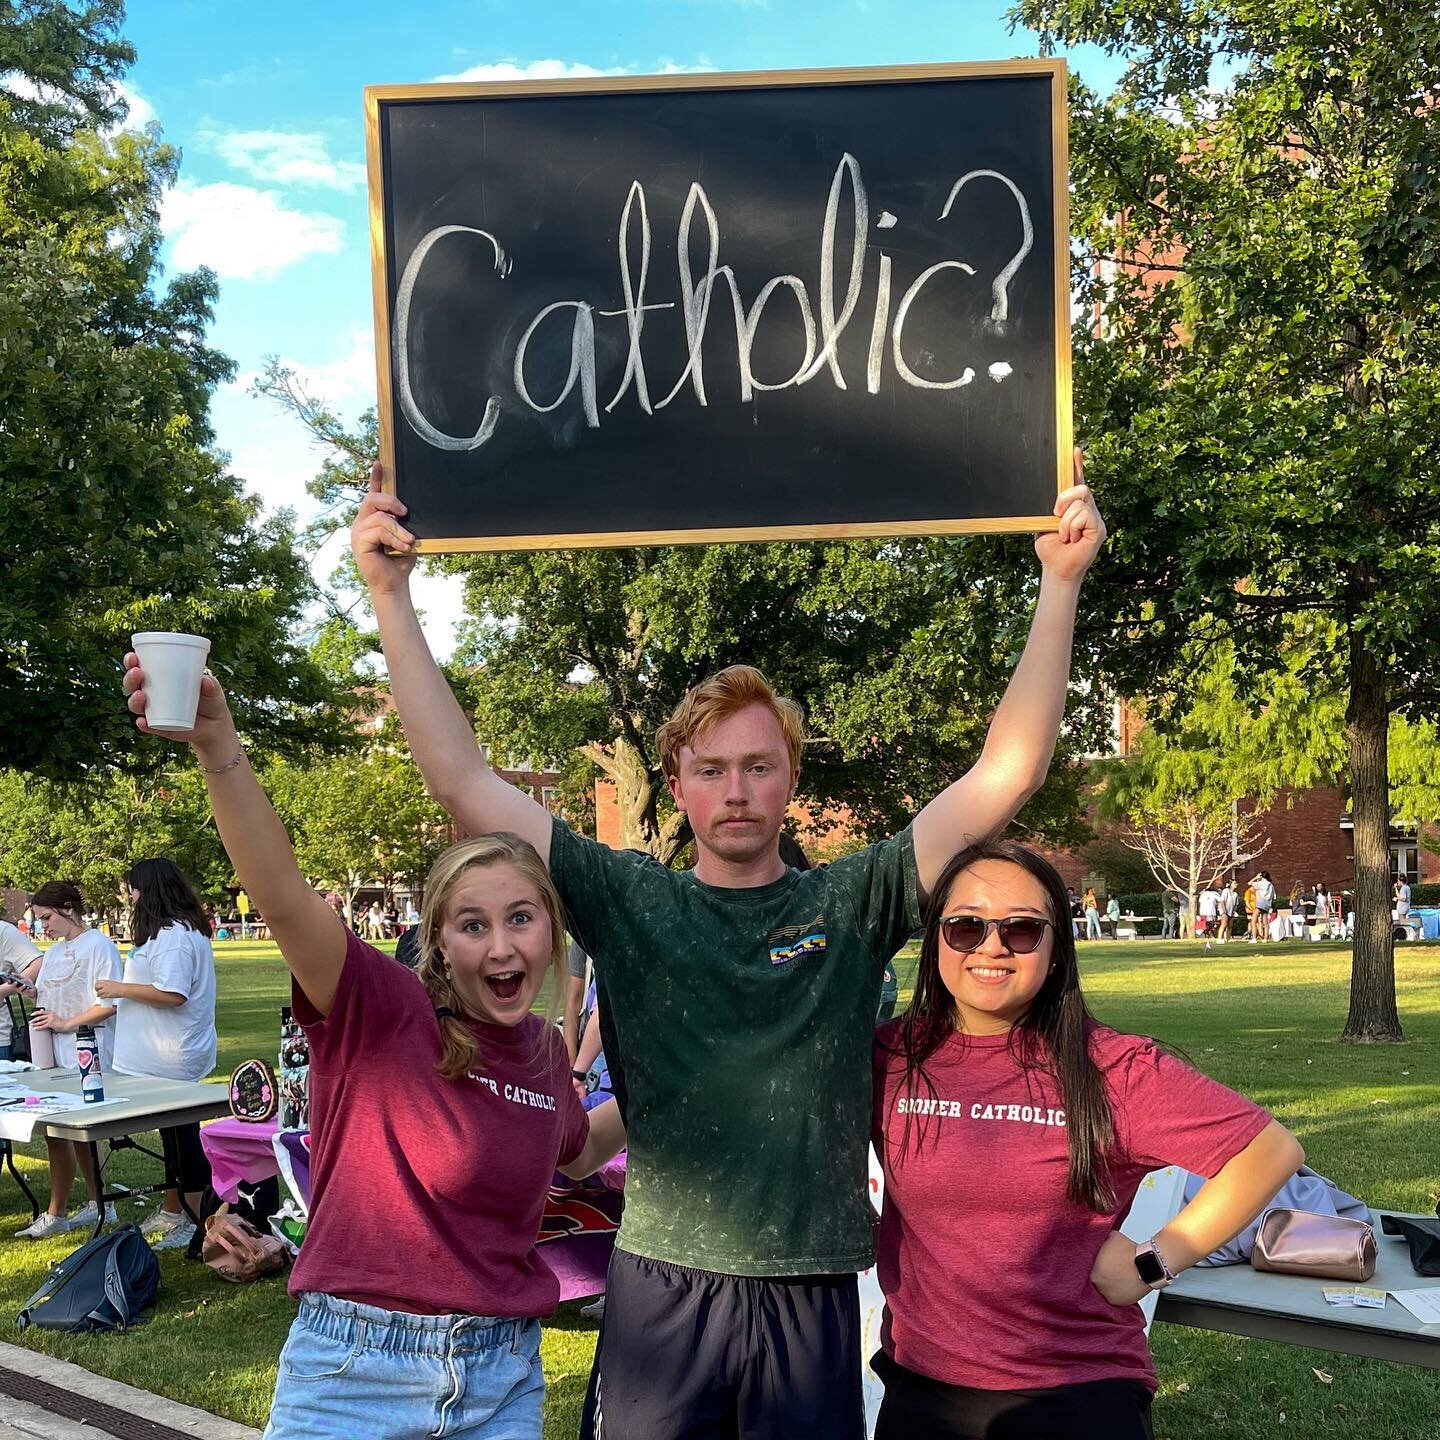 WE&rsquo;RE OFFICIALLY BACK ON CAMPUS!! Week 1 ✅🤩

What a fun welcome week filled with root beer floats, fuzzy&rsquo;s patio take over, a magic show, block party, and a freshmen event &mdash; here&rsquo;s to having a great semester ❤️🤍 #soonercatho